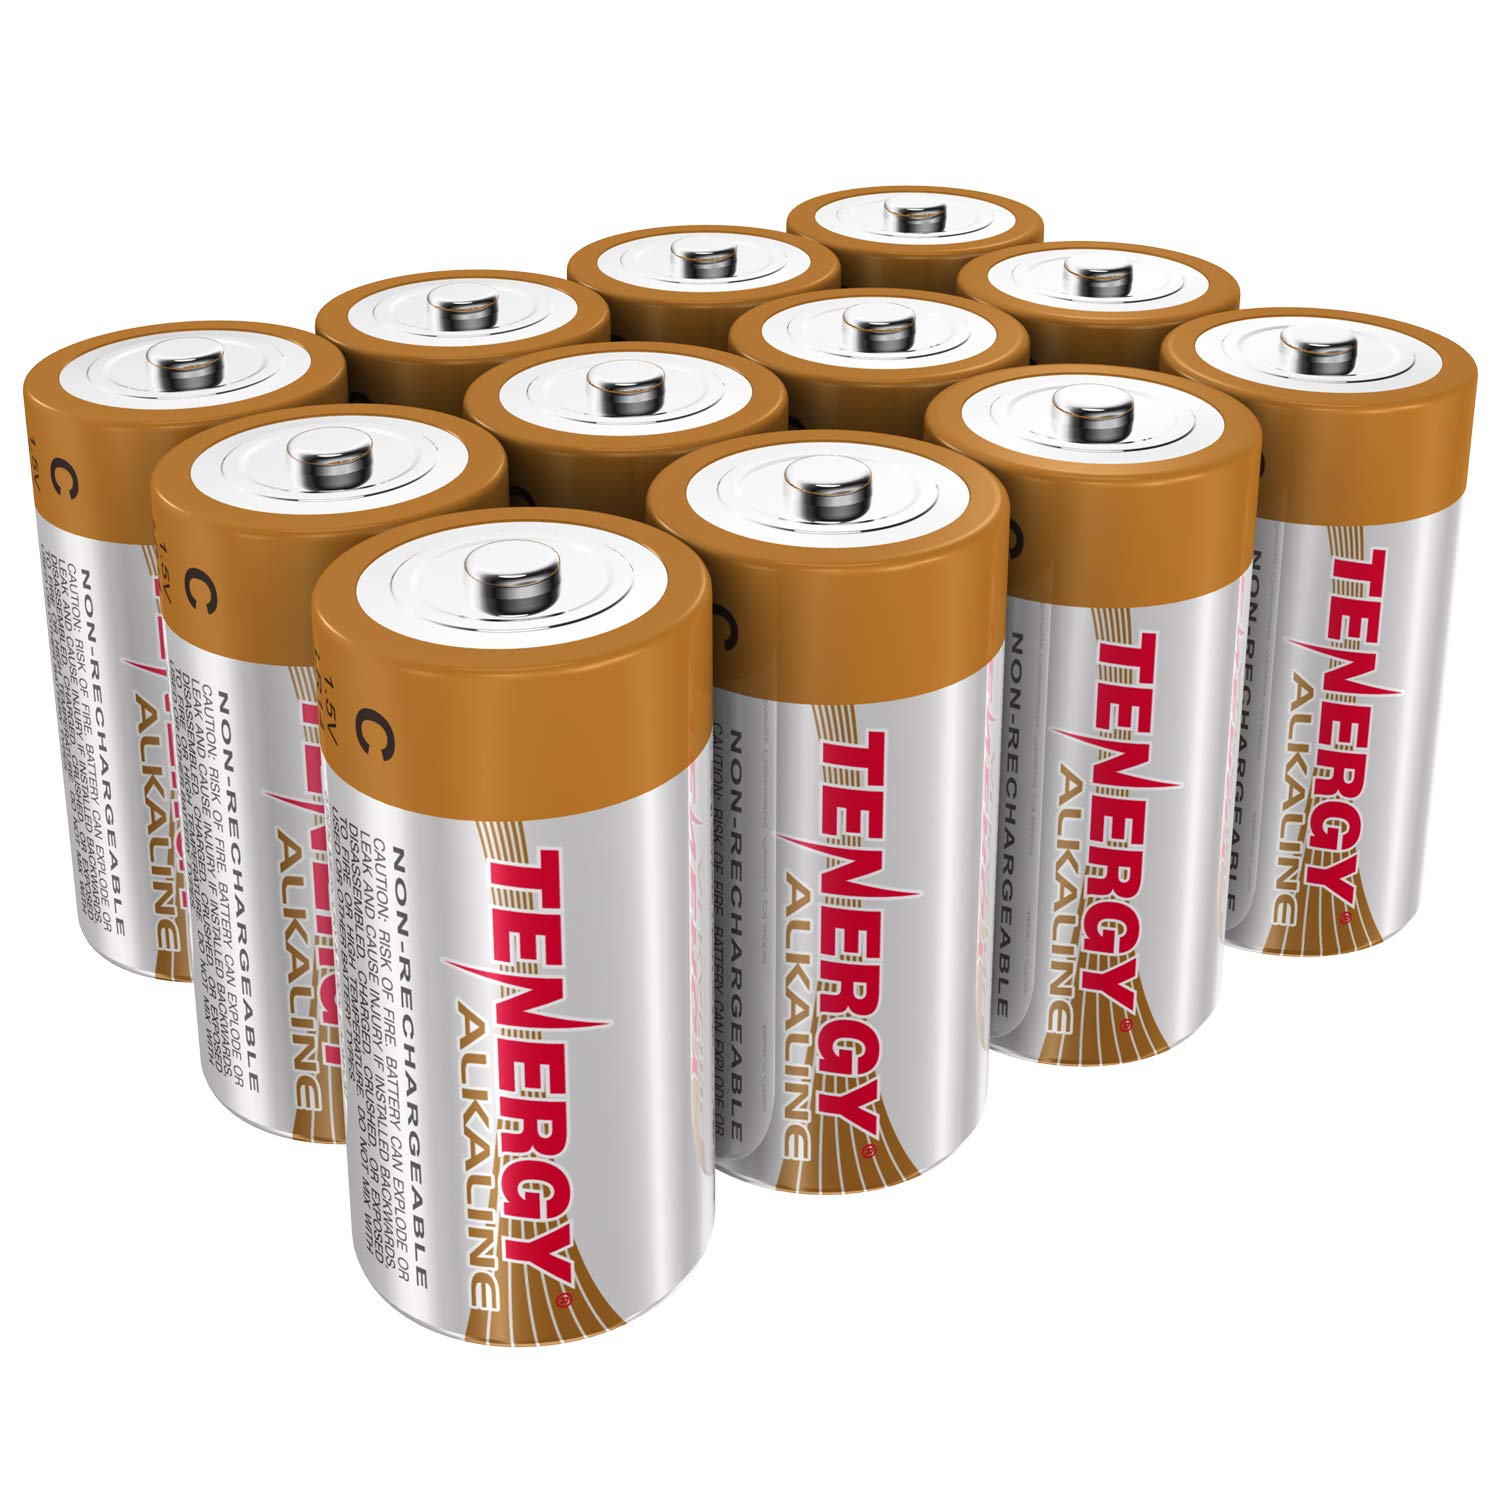 Tenergy 1.5V C Alkaline LR14 Battery, High Performance C Non-Rechargeable  Batteries for Clocks, Remotes, Toys & Electronic Devices, Replacement C  Cell Batteries, 12 Pack 12 Count (Pack of 1)